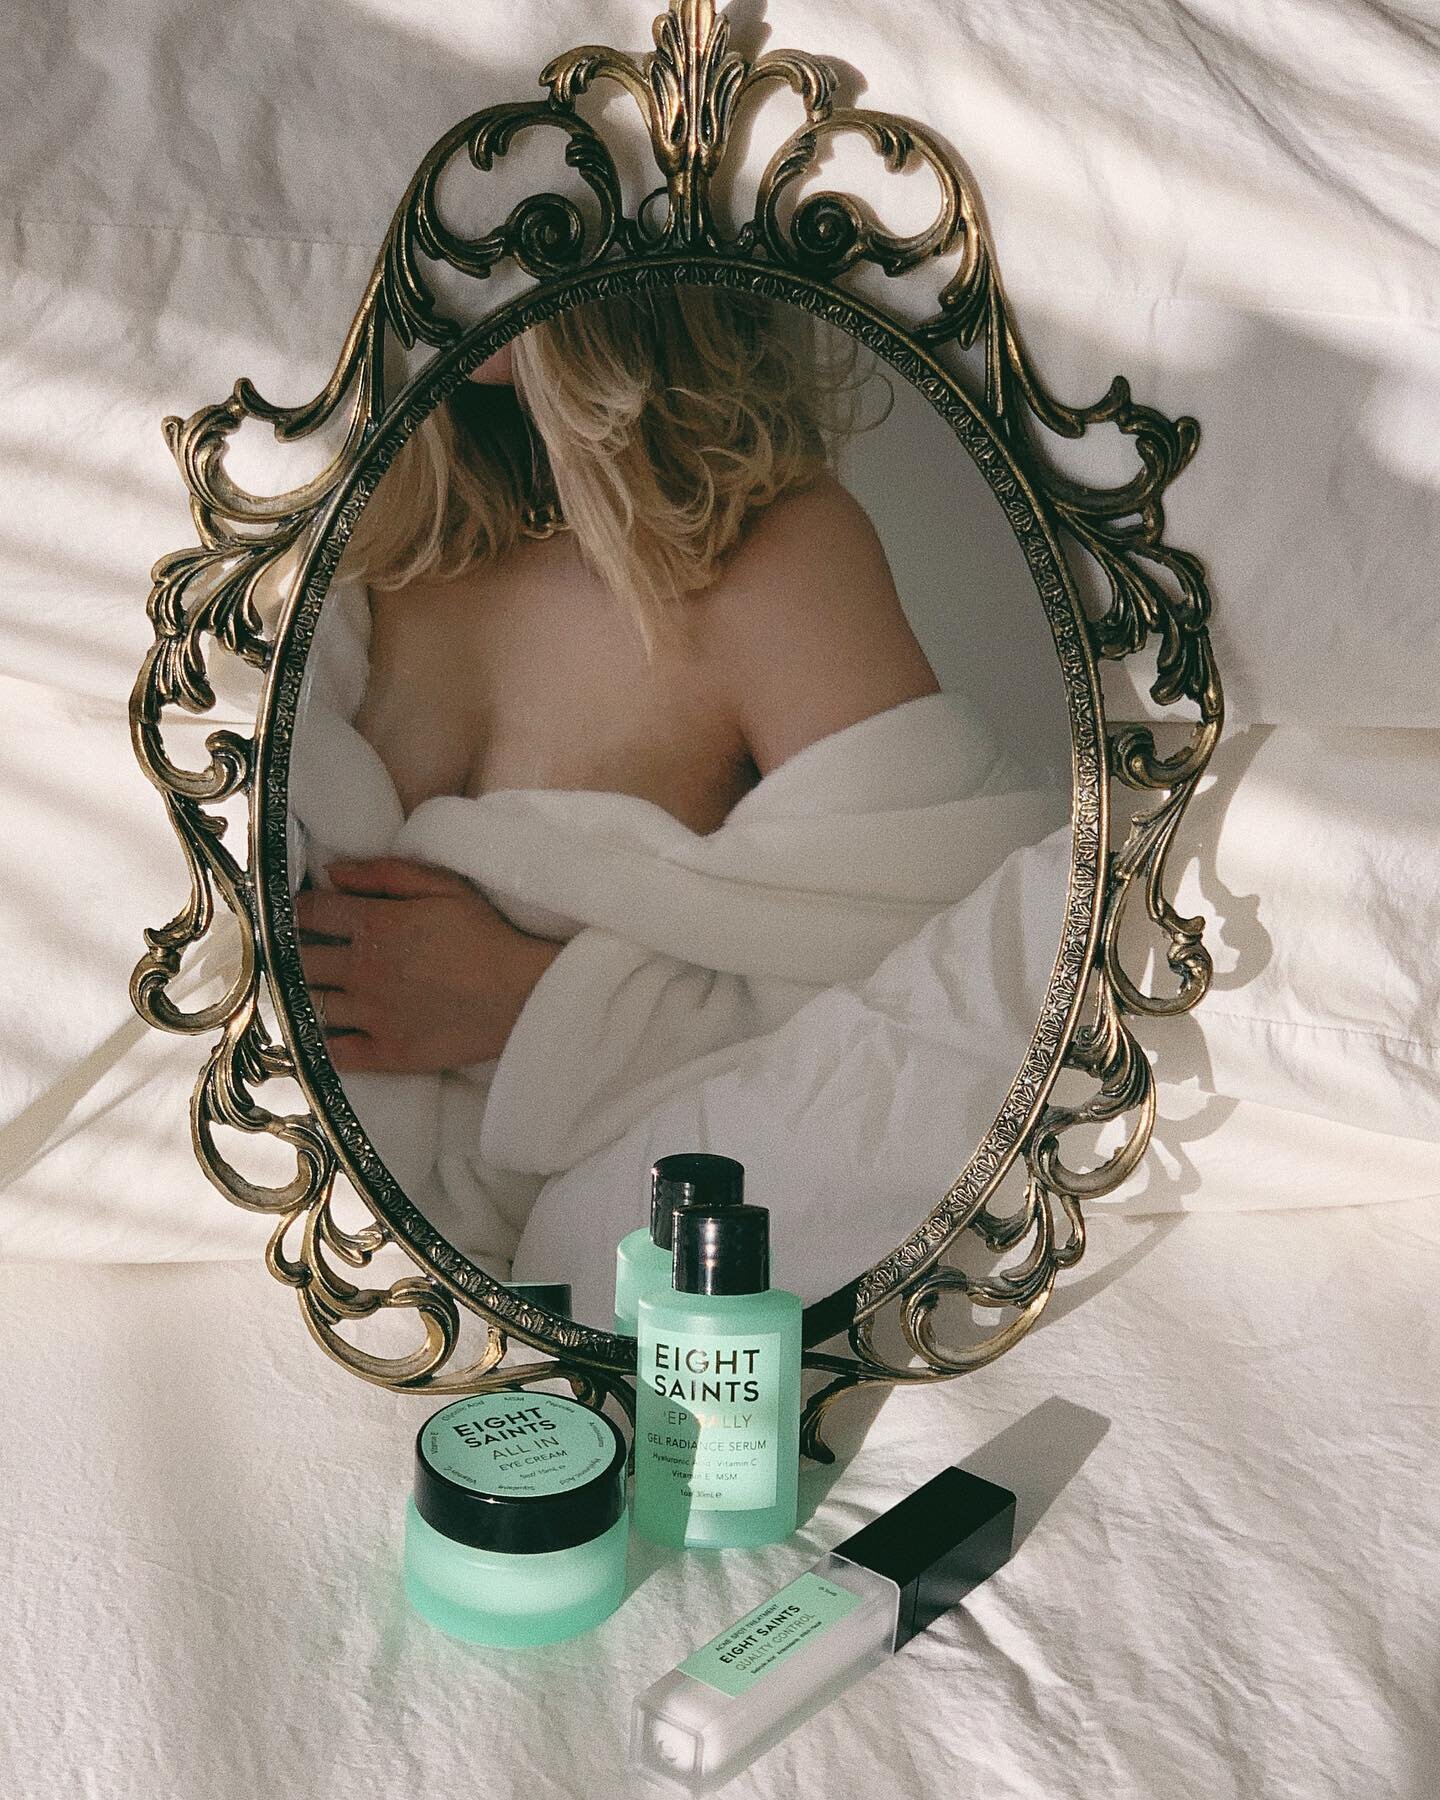 Mirror, Mirror...🕊🤍🌿
@eight_saints is fairest of them all. When I look for skincare for my sensitive skin I look for &mdash; clean, natural ingredients. @eight_saints has nailed down 8 key ingredients, aka 8 &ldquo;saints.&rdquo; My top picks are 